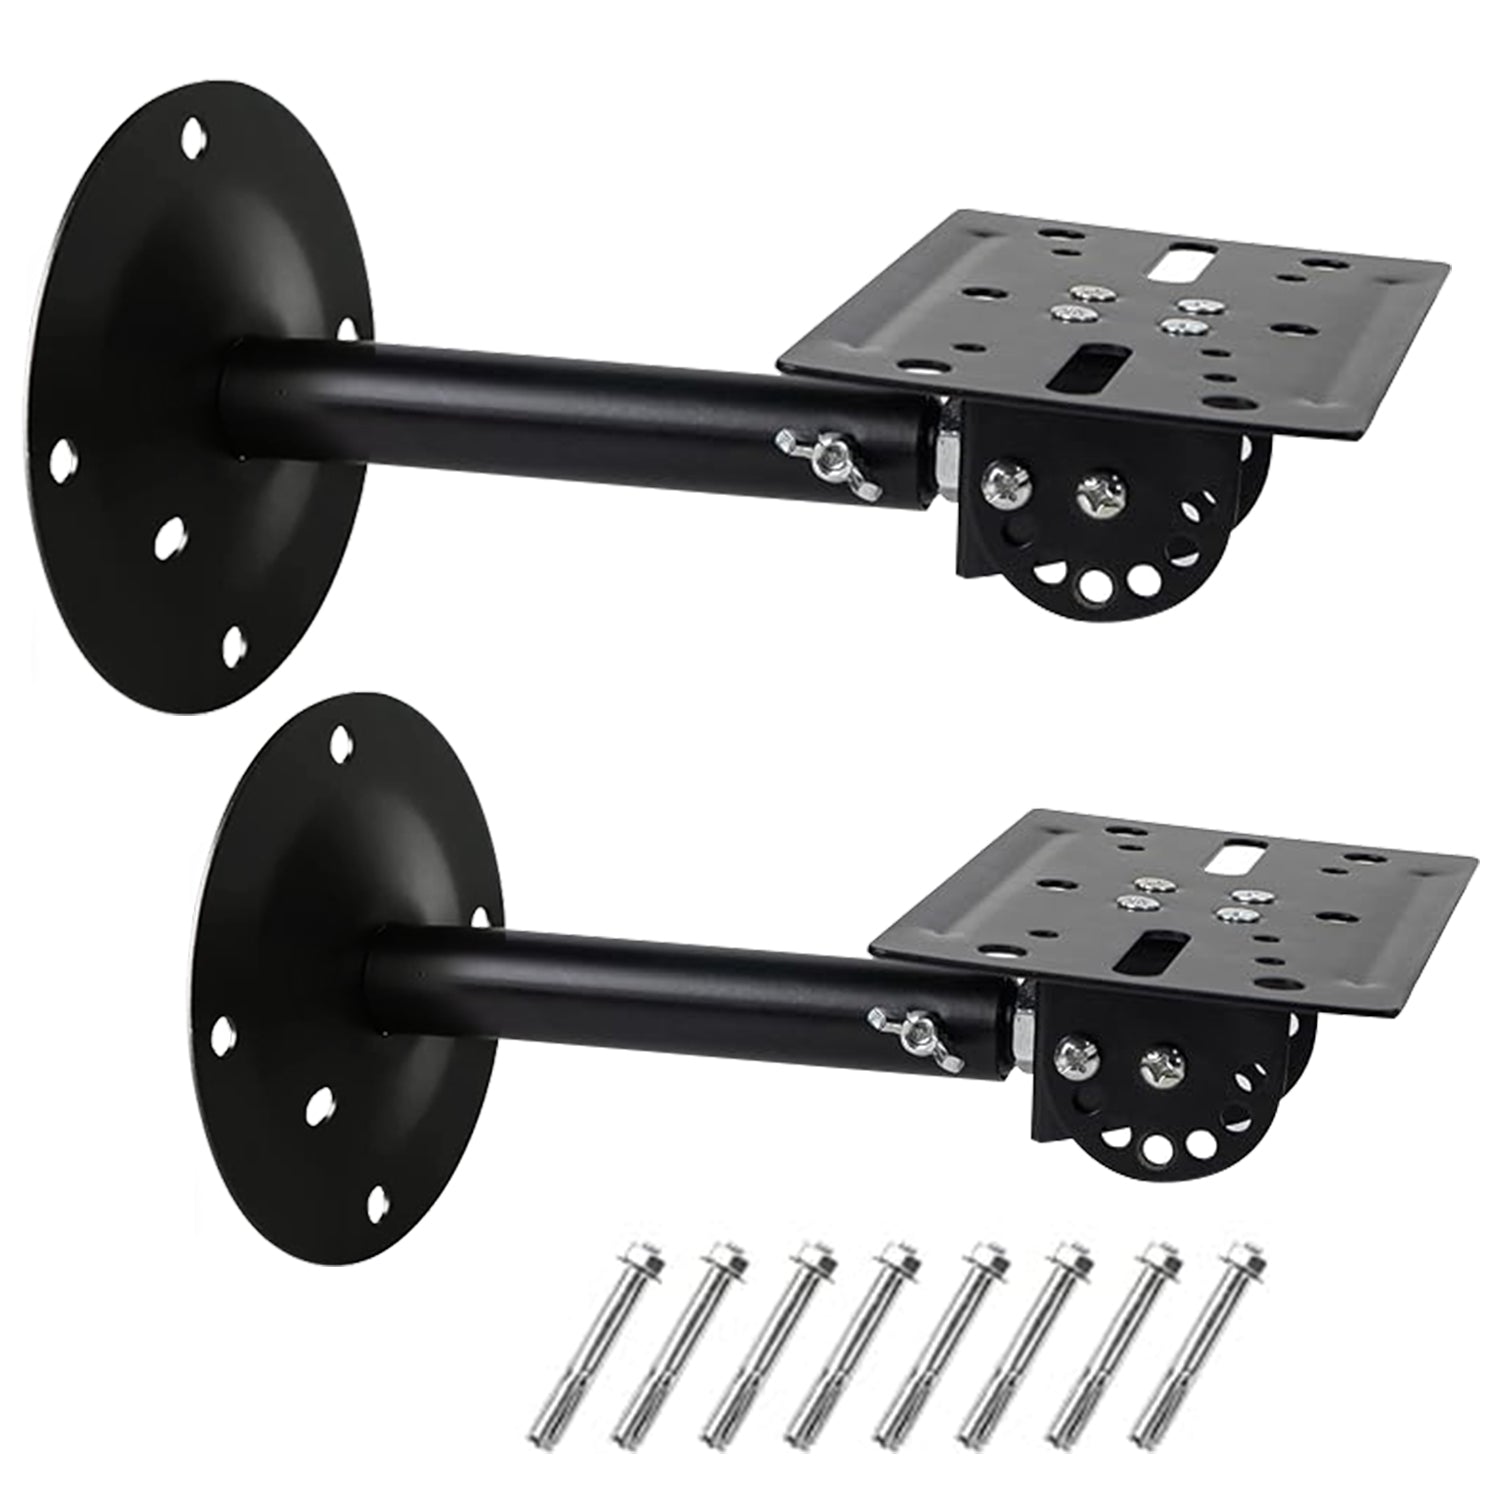 5Core Speaker Wall Mount 2 Pack Rotatable Angle Mounting Bracket Wall Speakers Holder